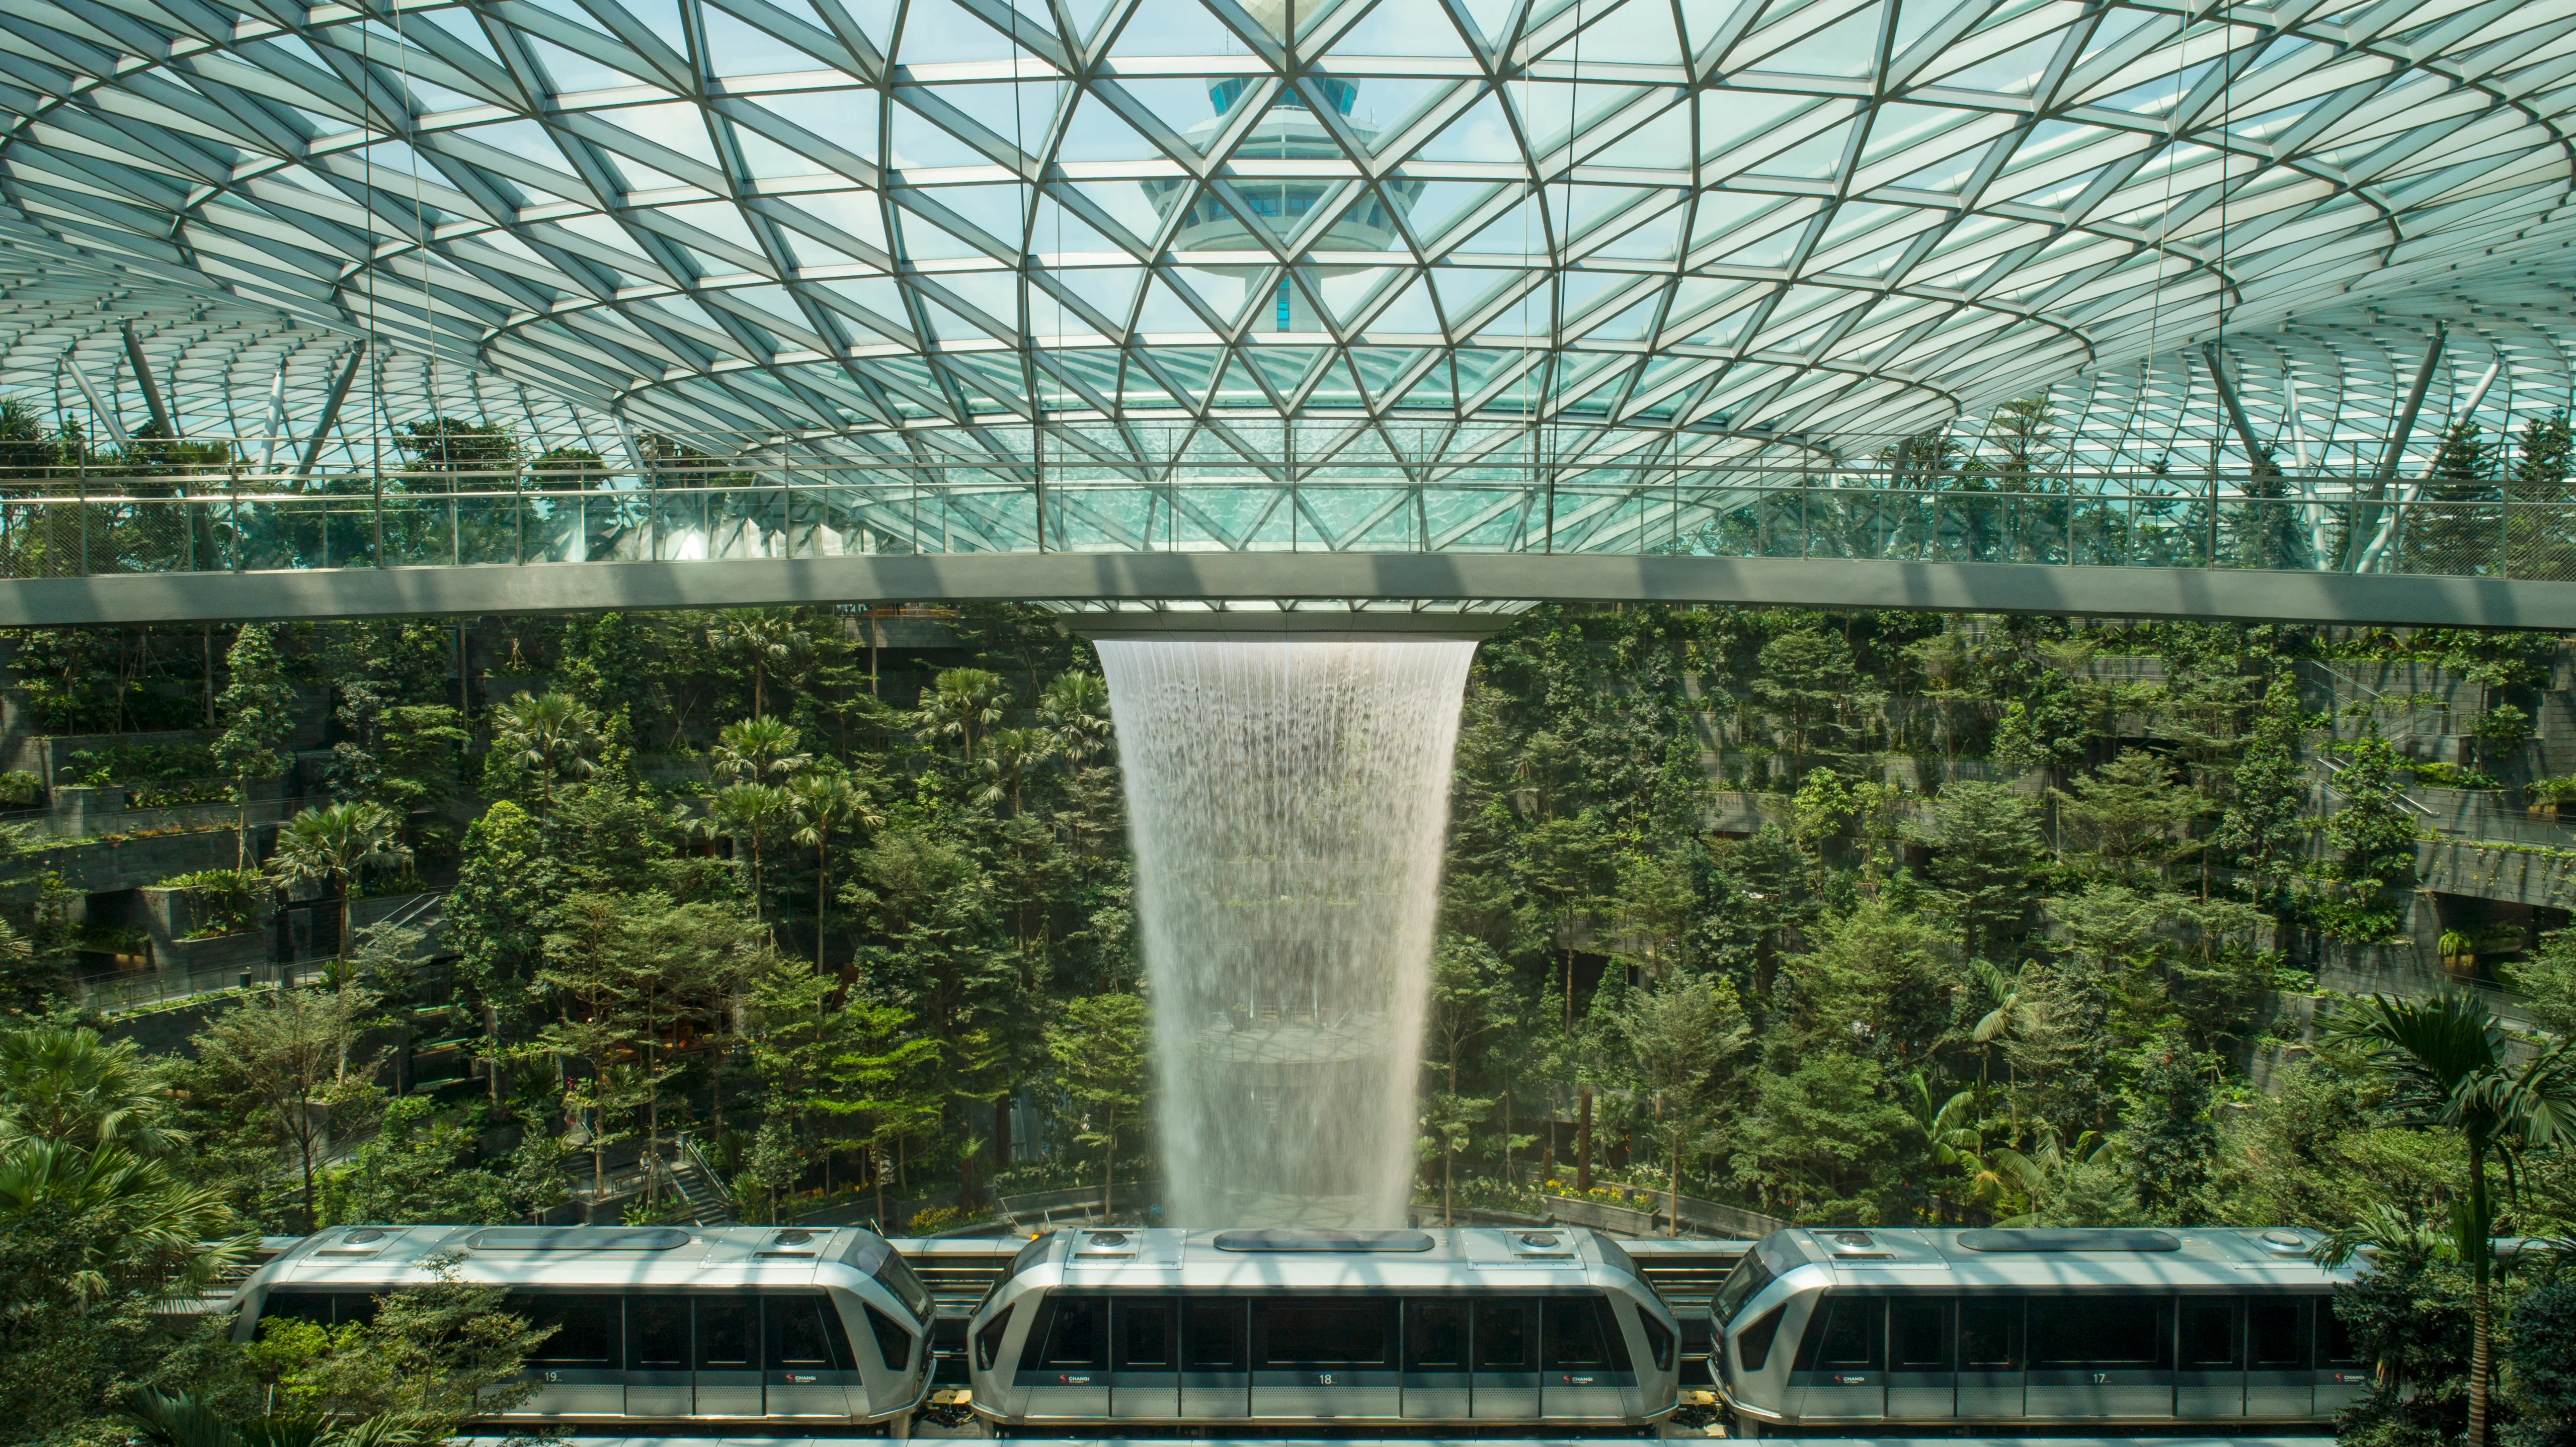 Changi Airport - Terminal 4 Opening Video (Director's Cut) on Vimeo